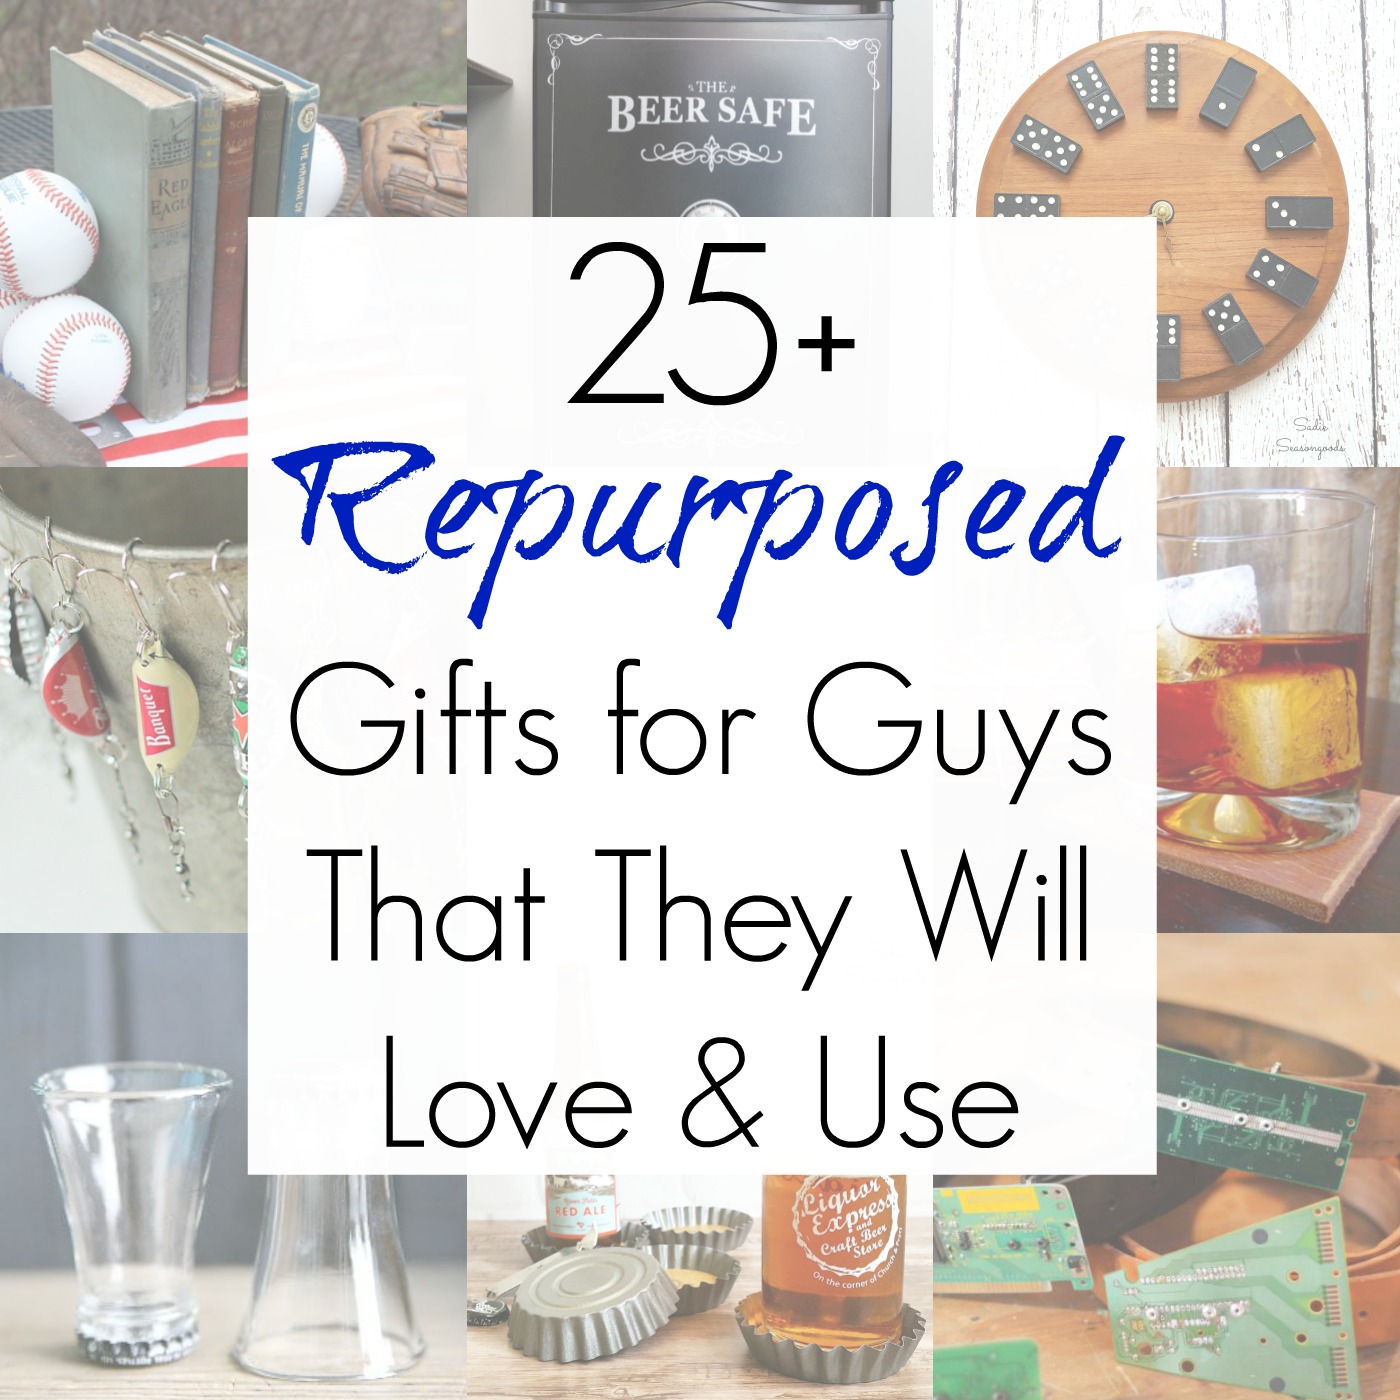 Upcycling Ideas for Gifts for guys, birthday gifts for him, and best man gift ideas